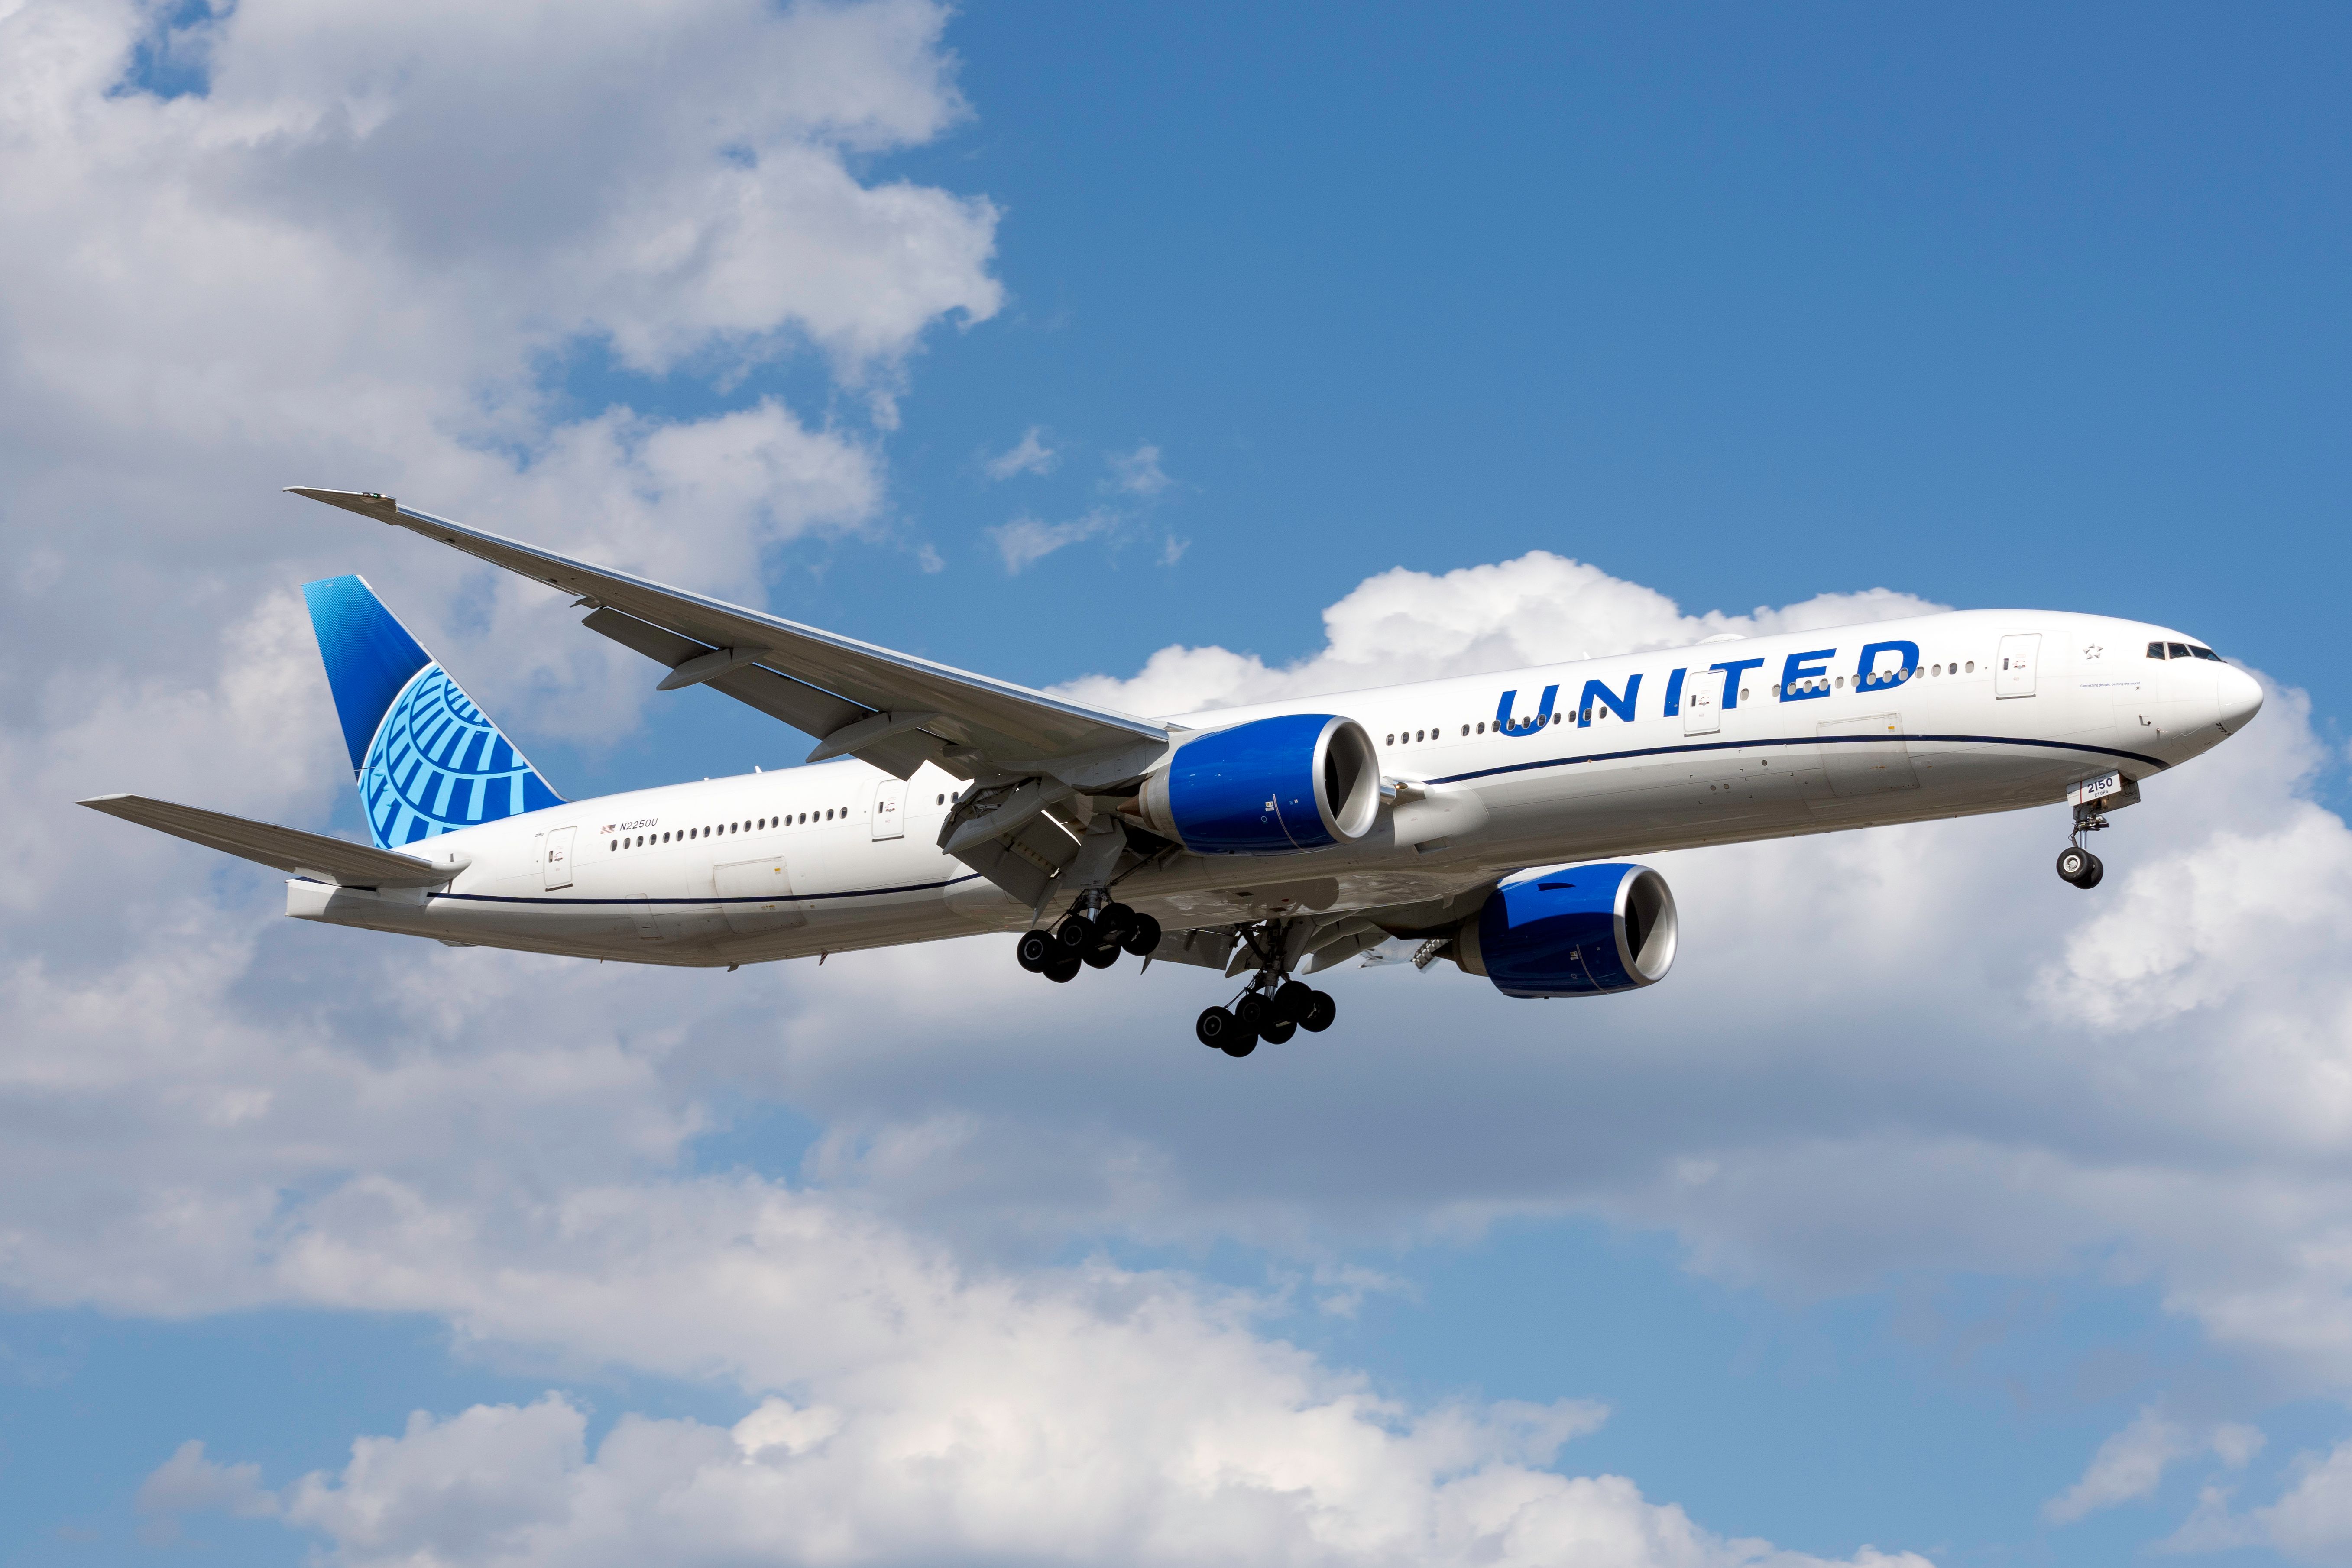 A United Airlines Boeing 777-300ER